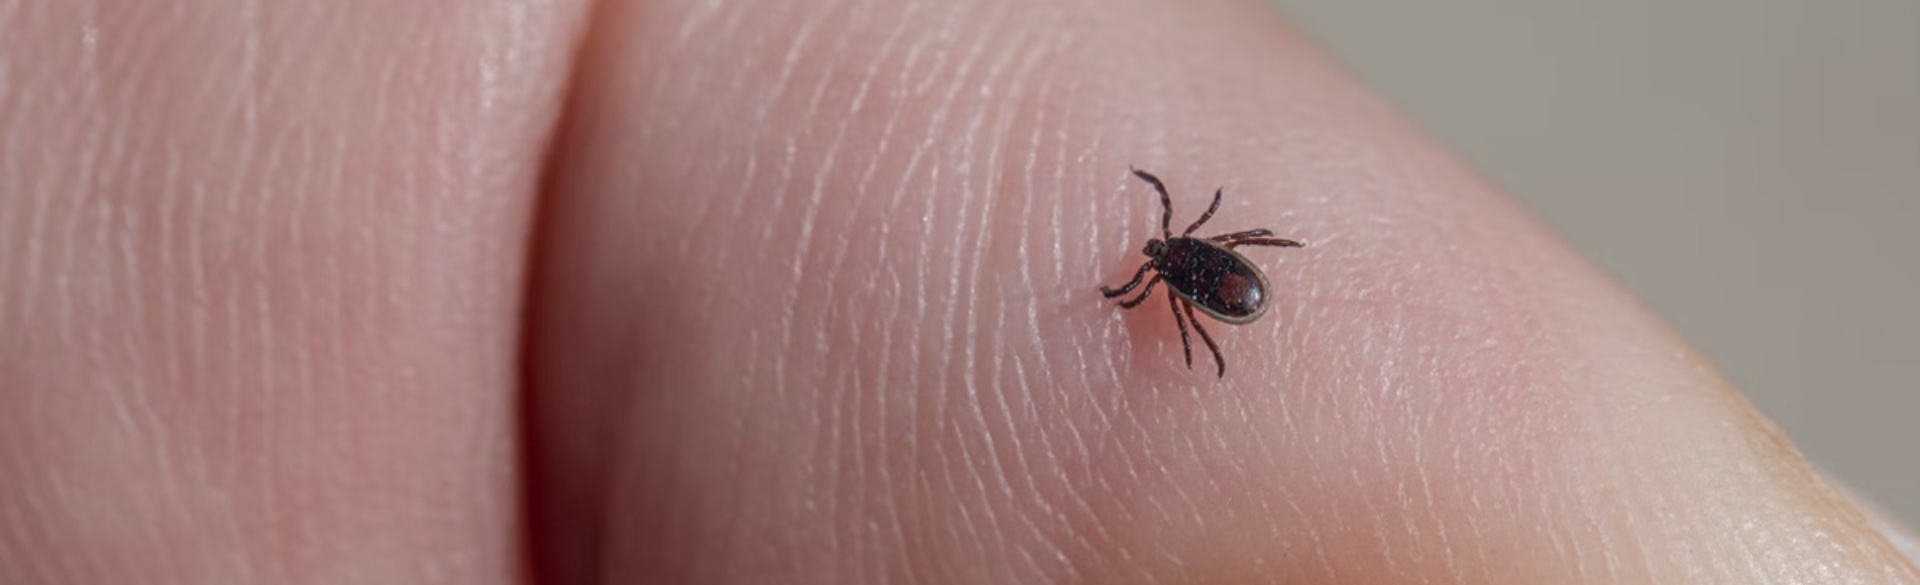 Tick on a person